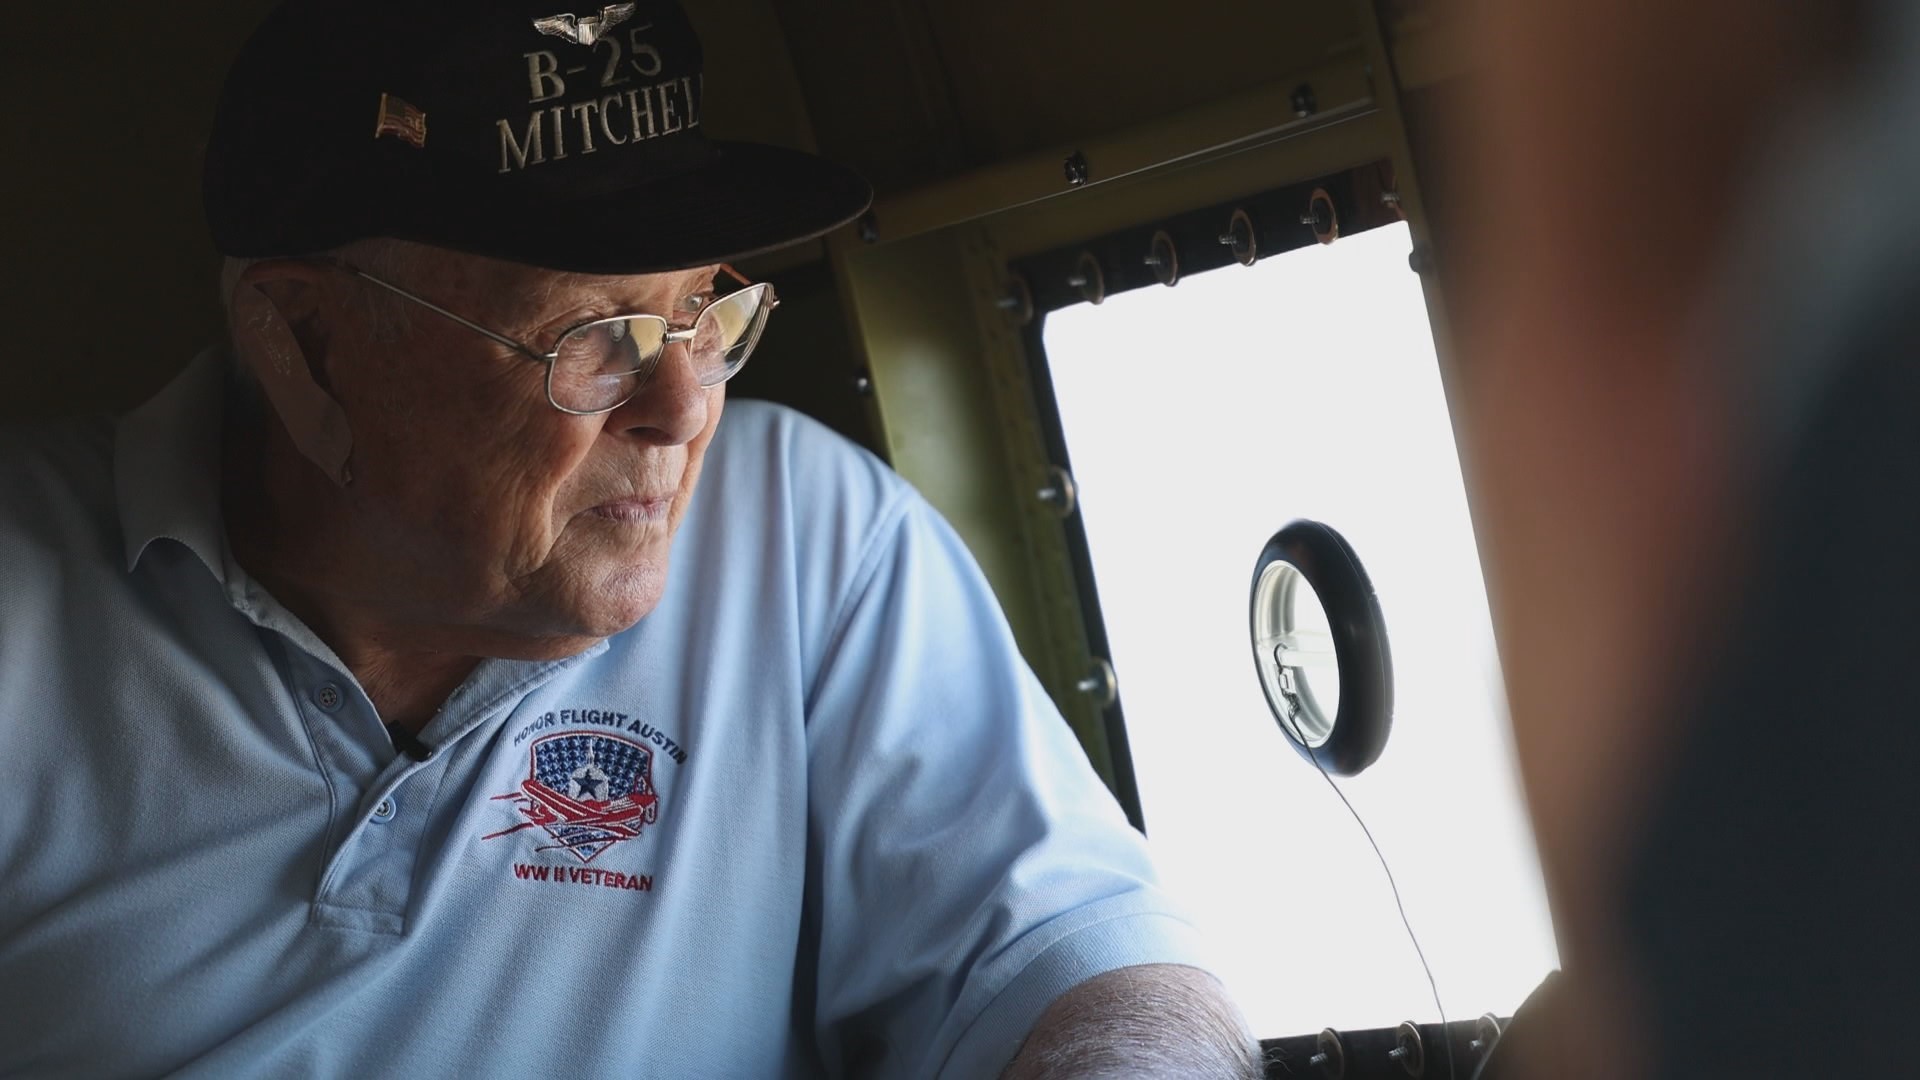 97-year-old Lew Griffith thought he was getting a tour of the Commemorative Air Force, but then he got to fly in a historic plane.